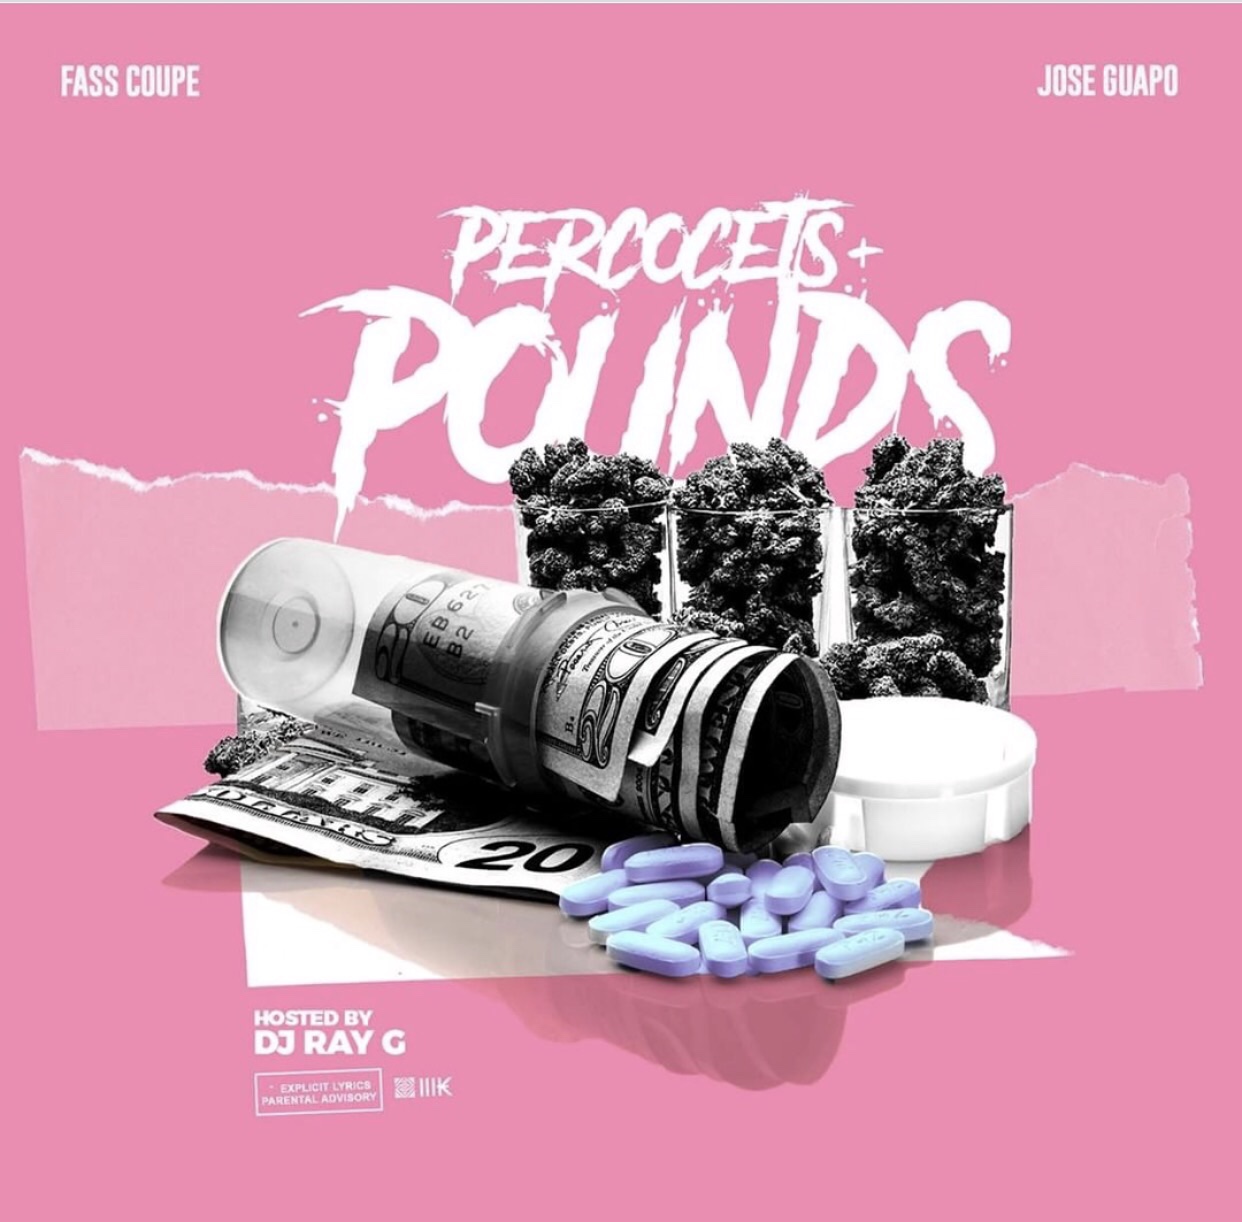 Stream Fasscoupe & Jose Guapo ‘Percocets & Pounds’ Mixtape Hosted By DJ Ray G